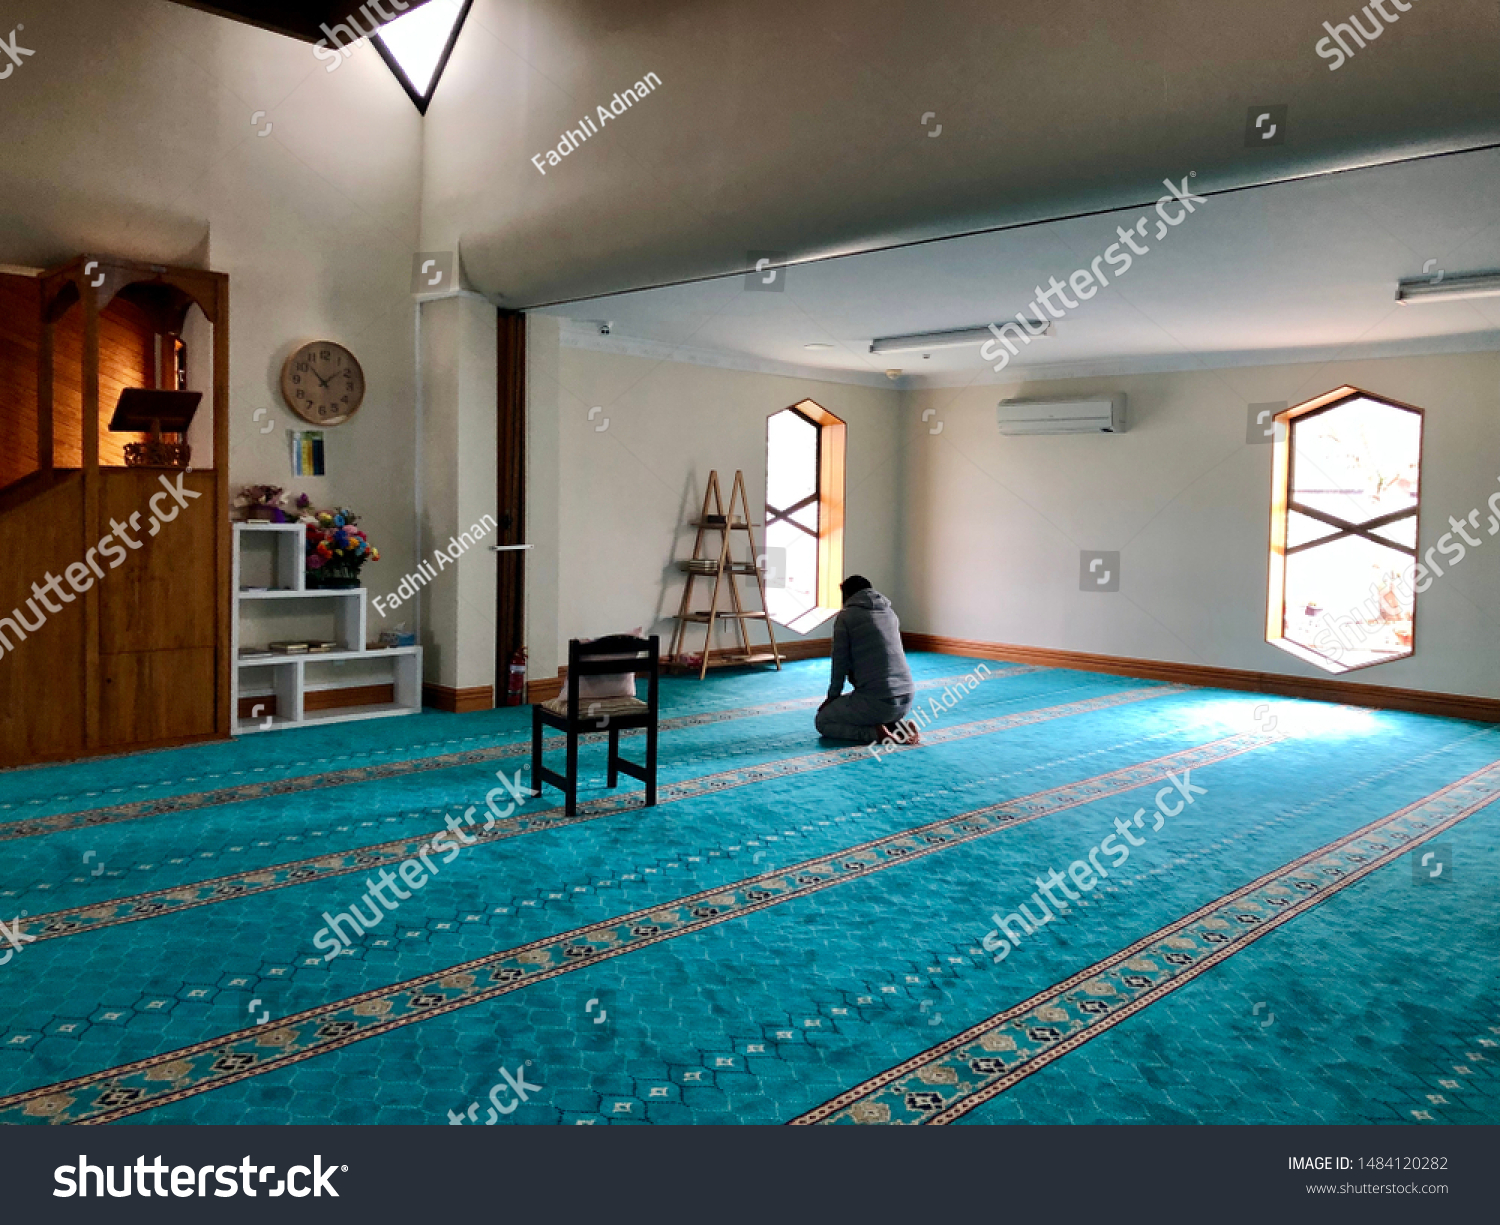 Linwood Islamic Centre Images Stock Photos Vectors Shutterstock